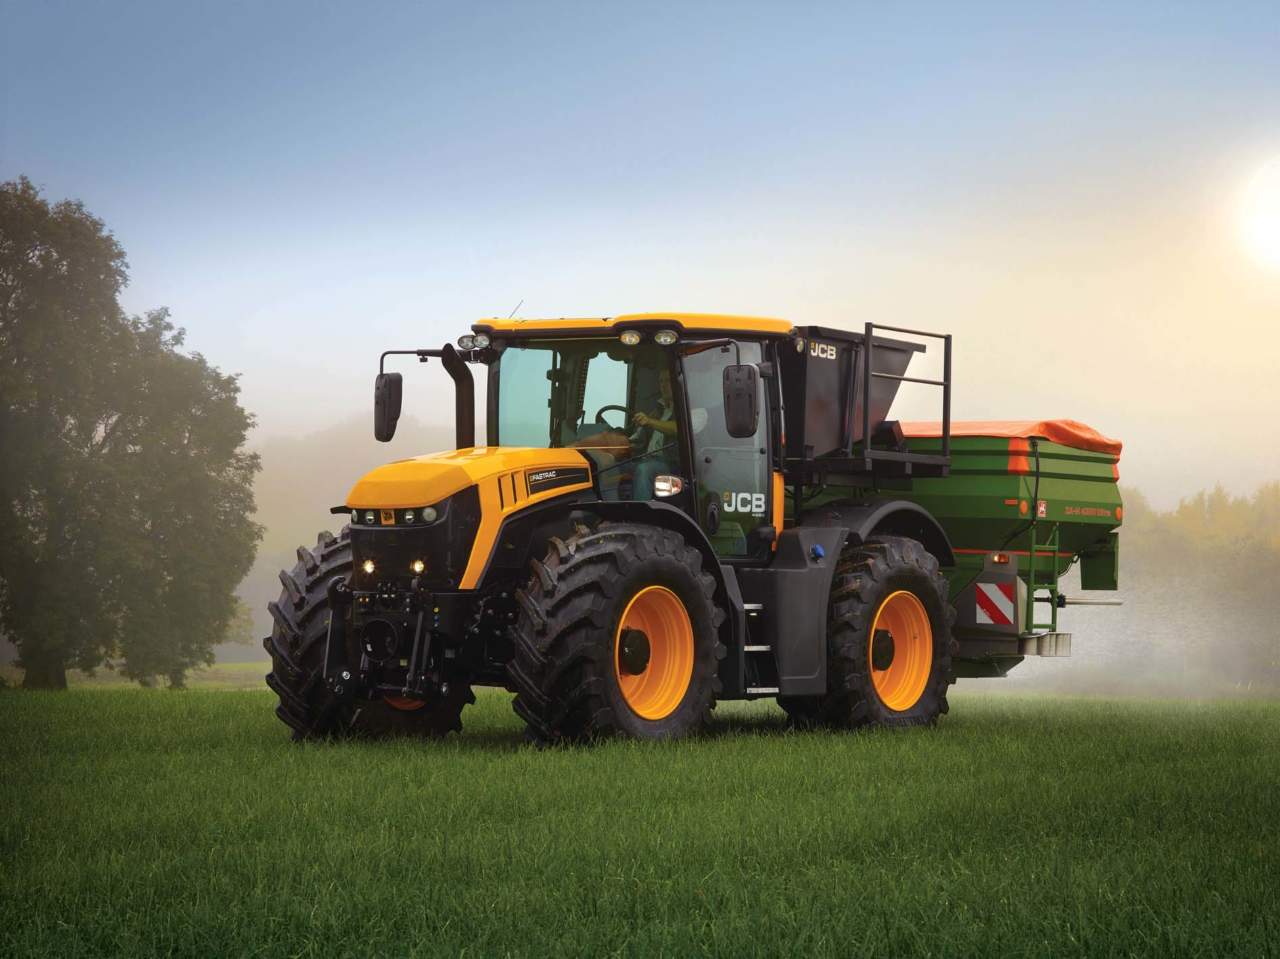 2013 - the Fastrac 4000 Series is previewed at Agritechnica